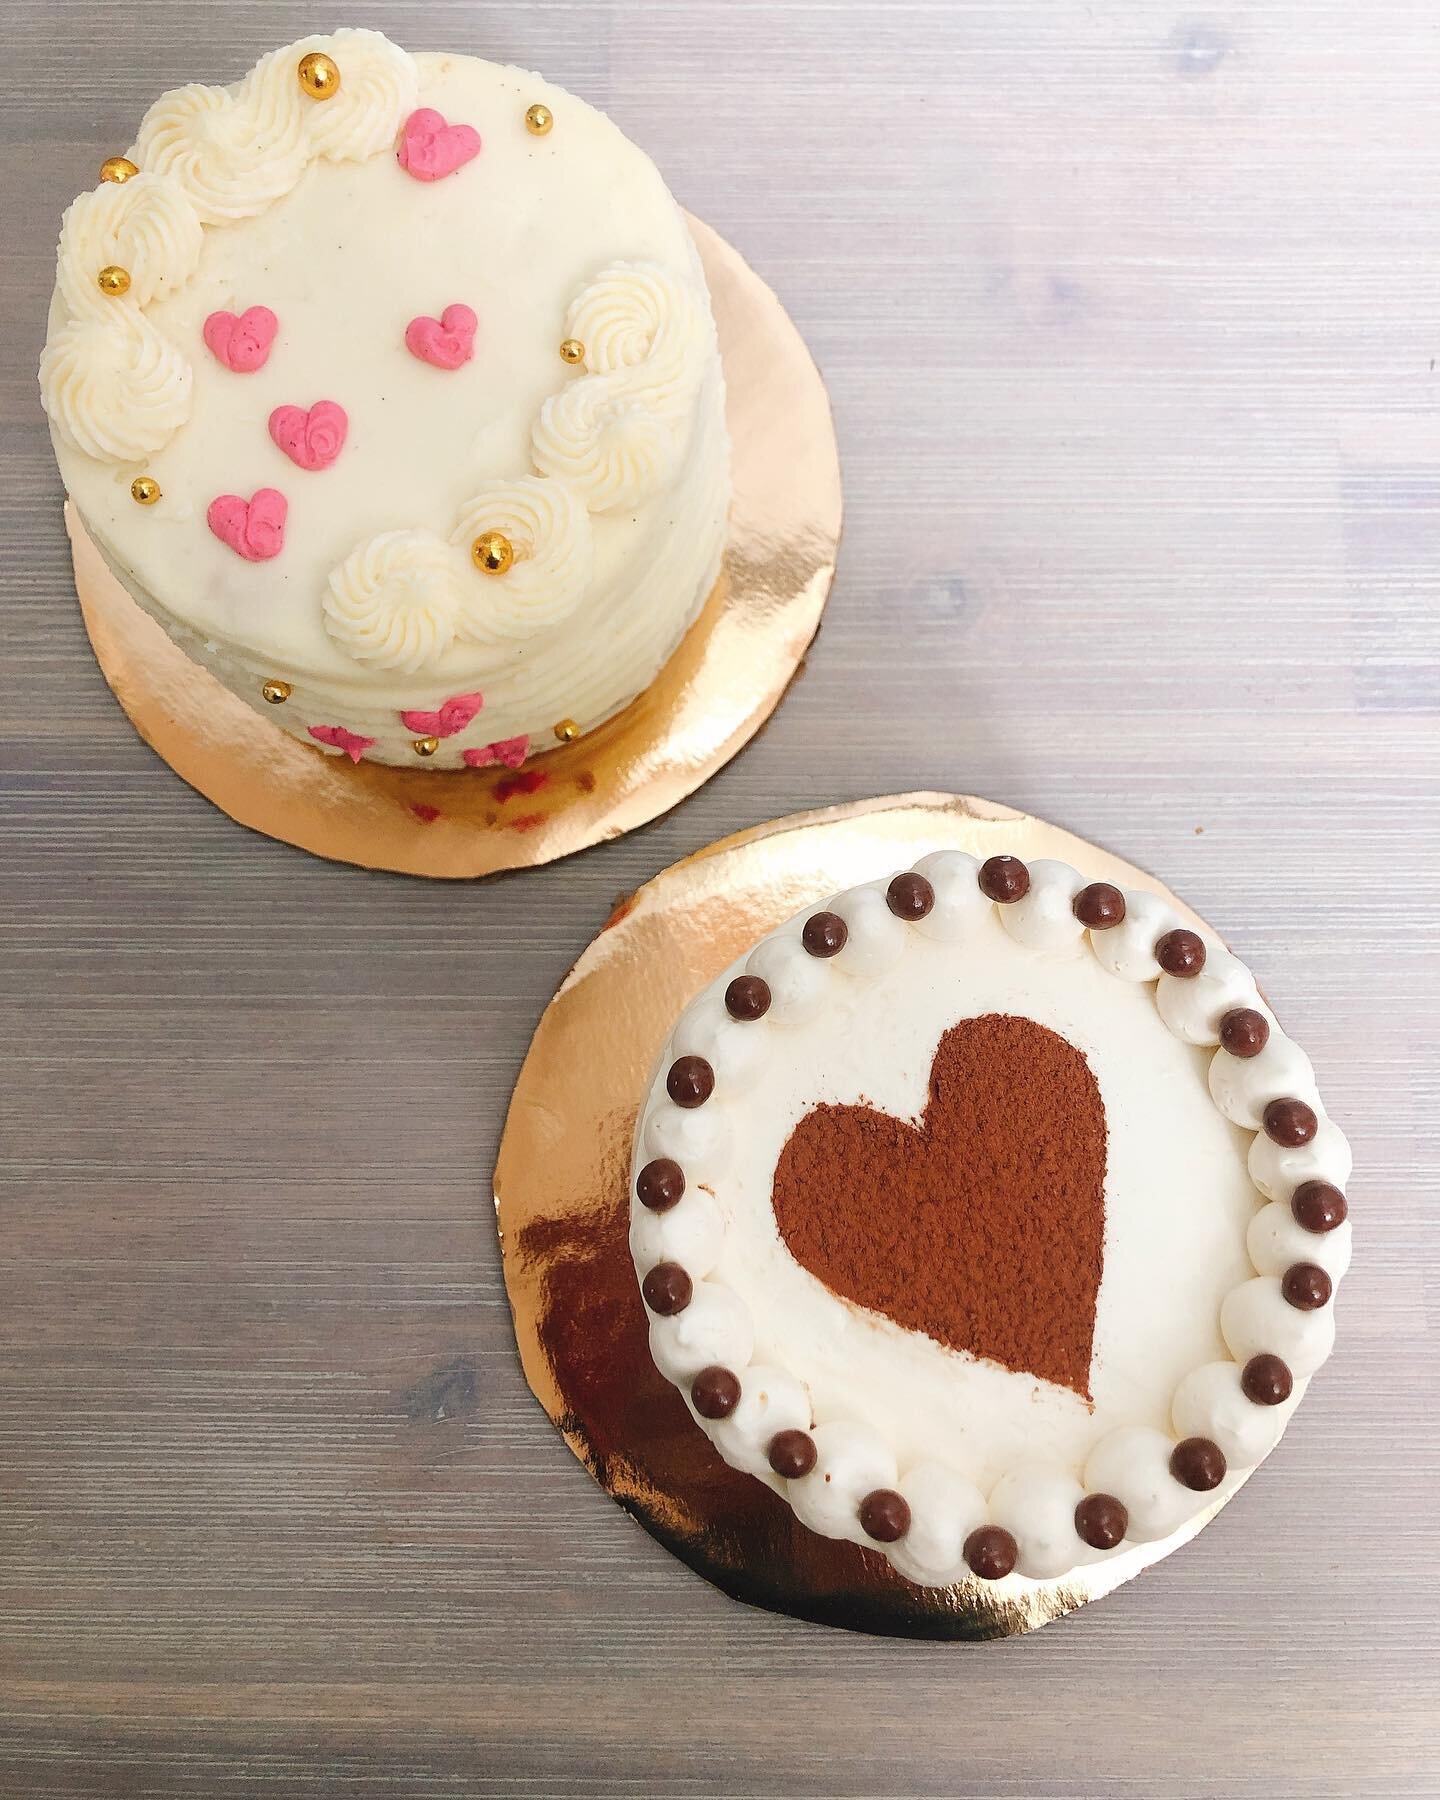 Valentines is just around the corner. We have these 4in baby cakes for you to share with your love one, your boo, or your bestie. Which ever special person you choose these cakes are sure to warm your hearts. Order by 2/10 for pick or delivery for 2/